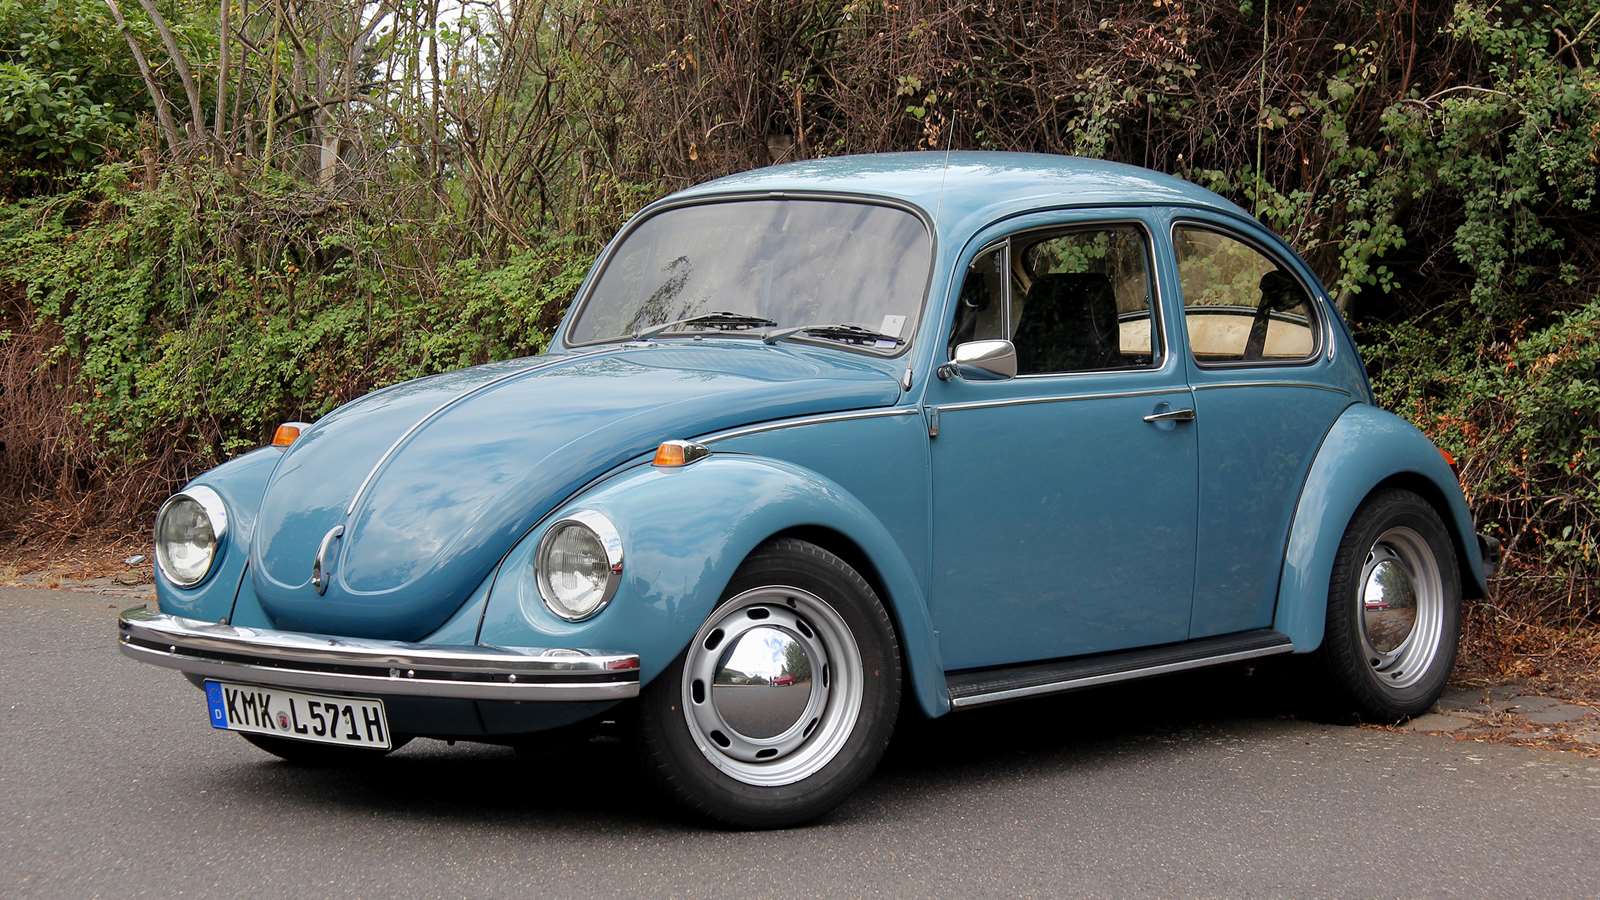 16 things you might not know about the Volkwagen Beetle